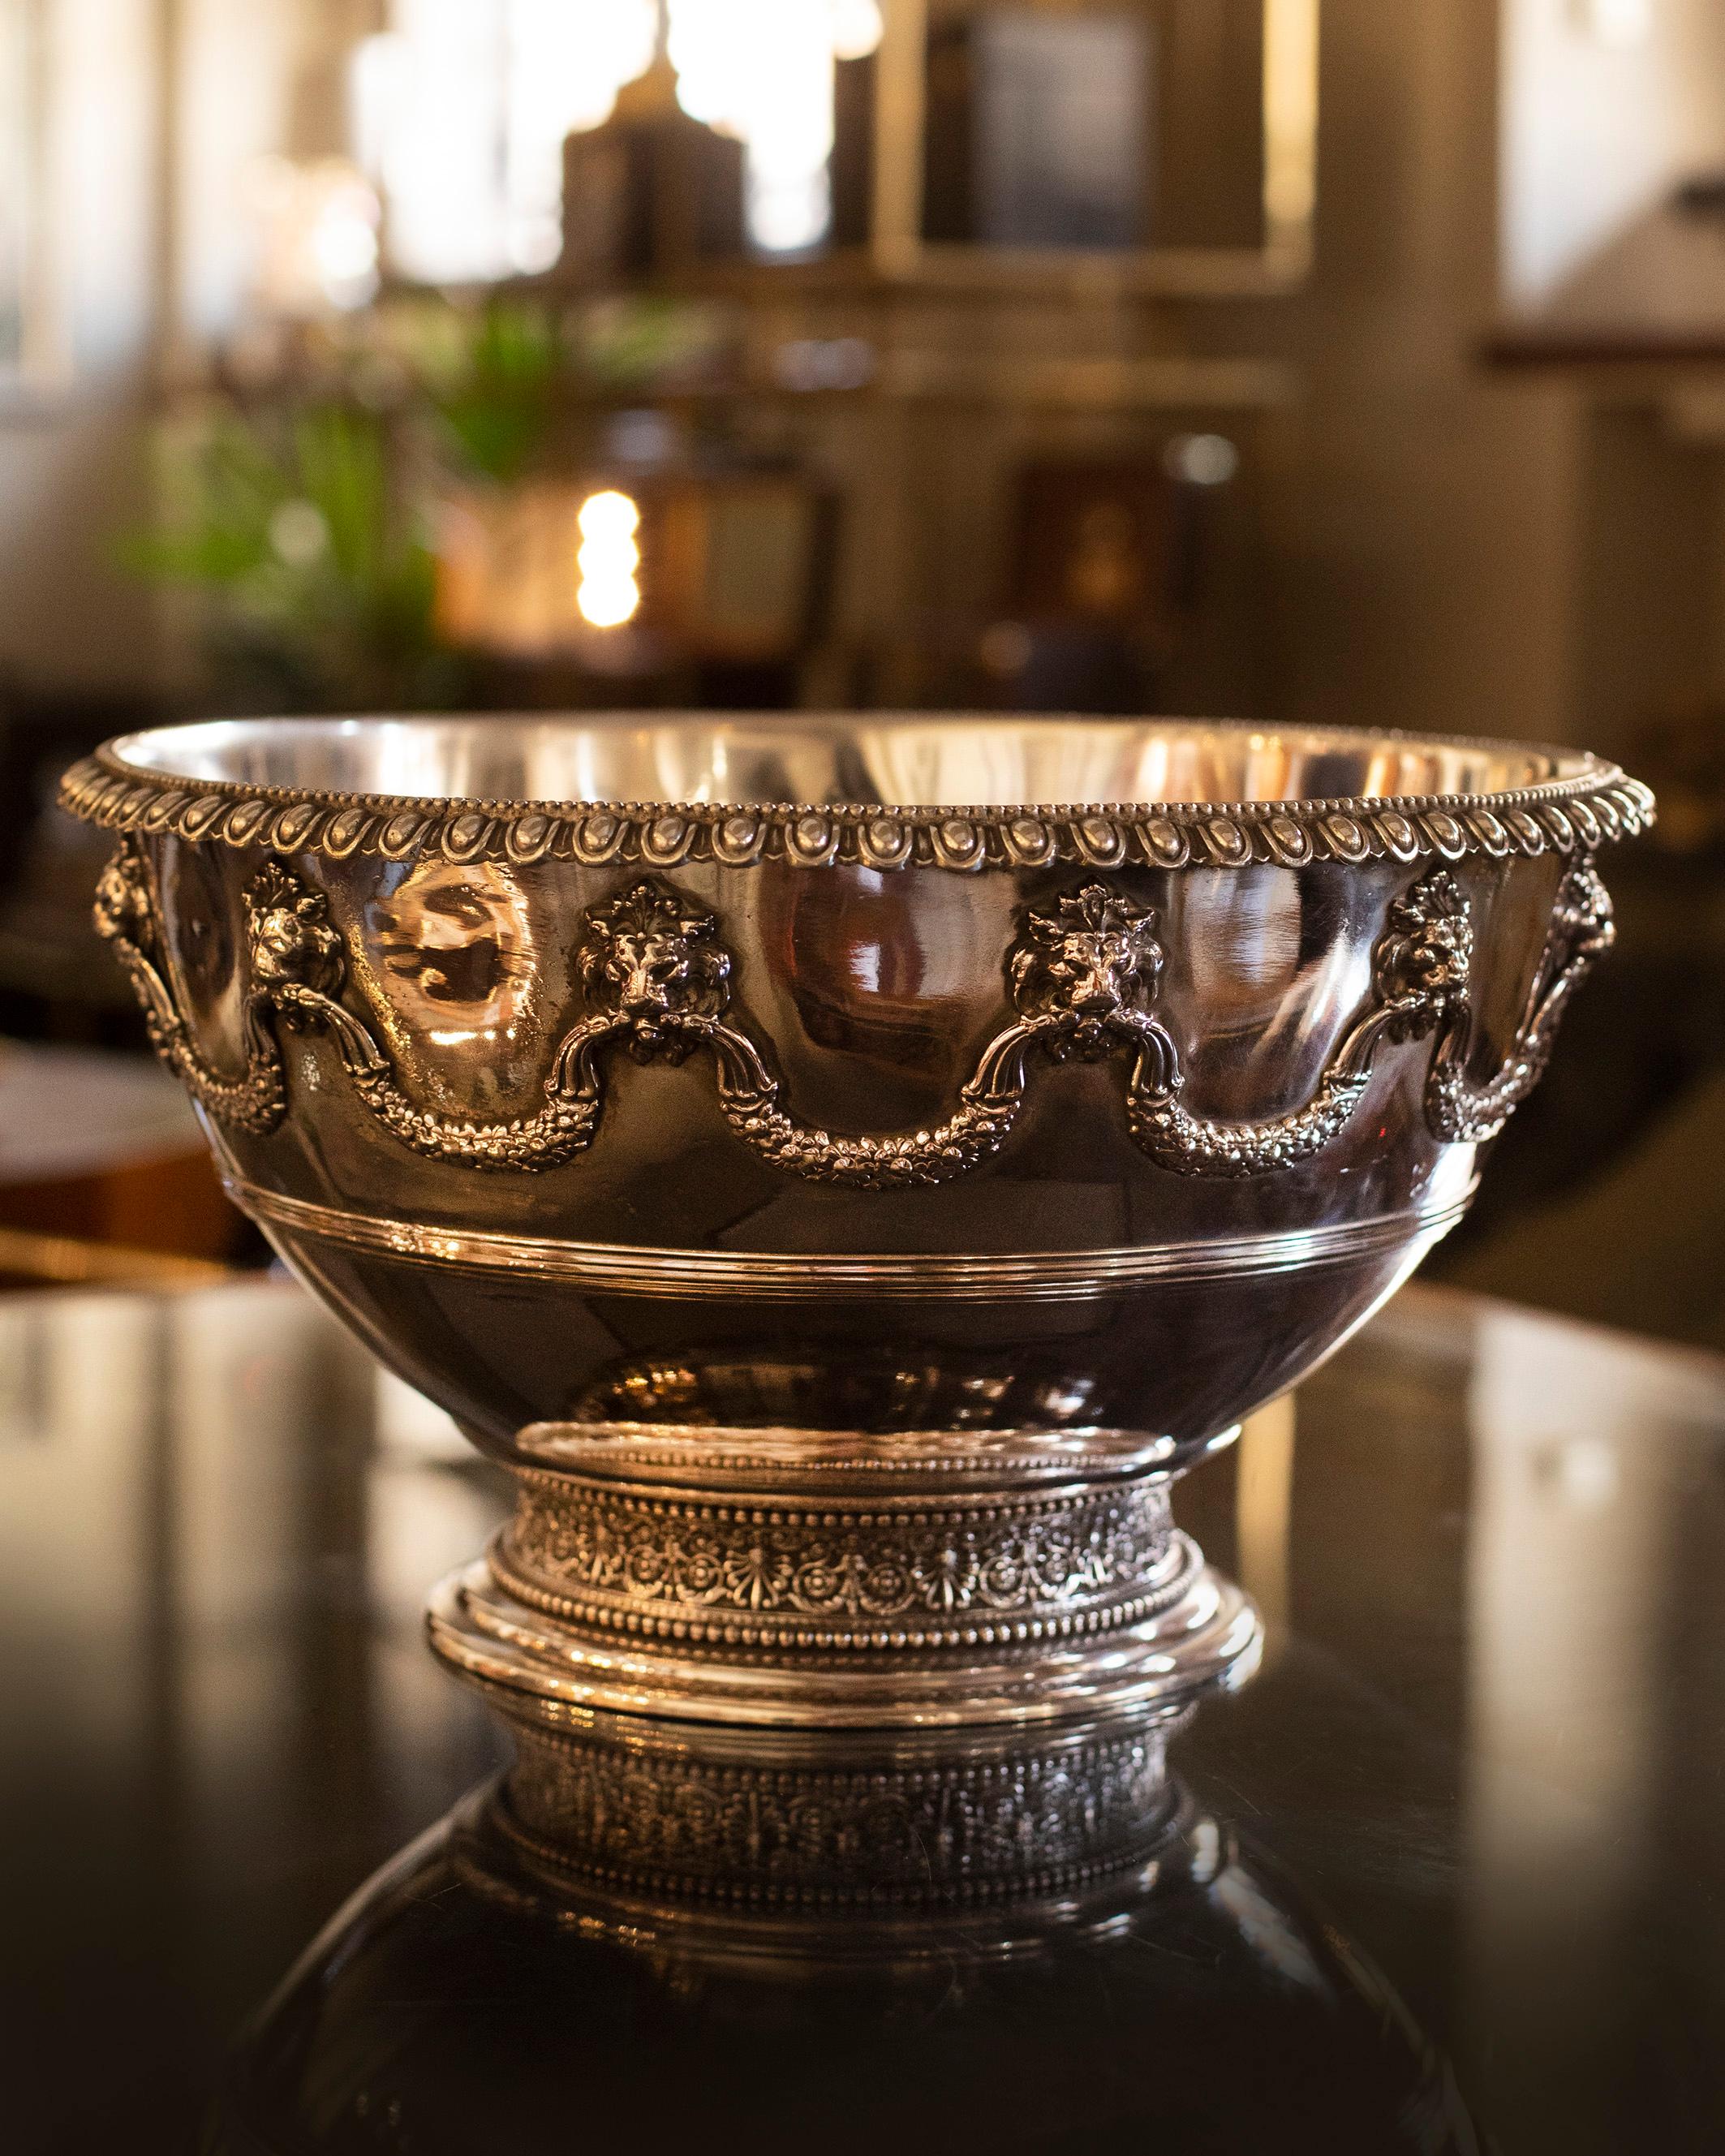 This mid-twentieth century english silver on copper champagne bucket features a lions decoration and a floreal adornment on the base. 

A stylish way to keep your champagne perfectly cool.